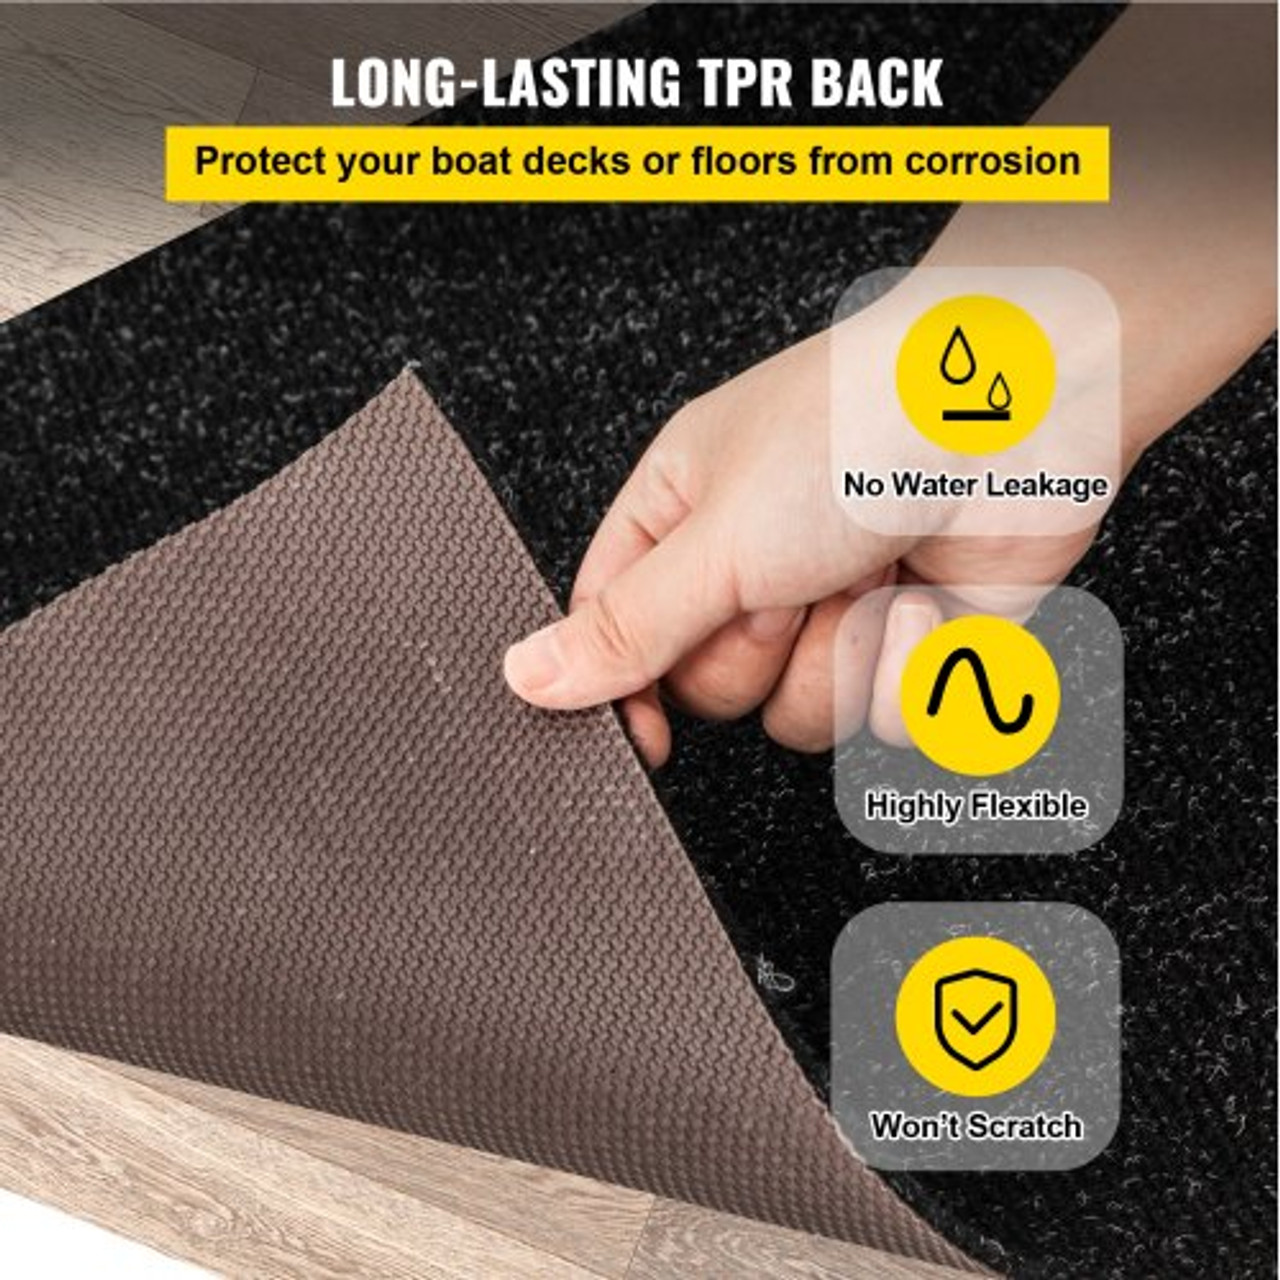 Boat Carpet, 6 ft x 29.5 ft Marine Carpet for Boats, Waterproof Black Indoor Outdoor Carpet with Marine Backing Anti-Slide Marine Grade Boat Carpet Cuttable Easy to Clean Patio Rugs Deck Rug